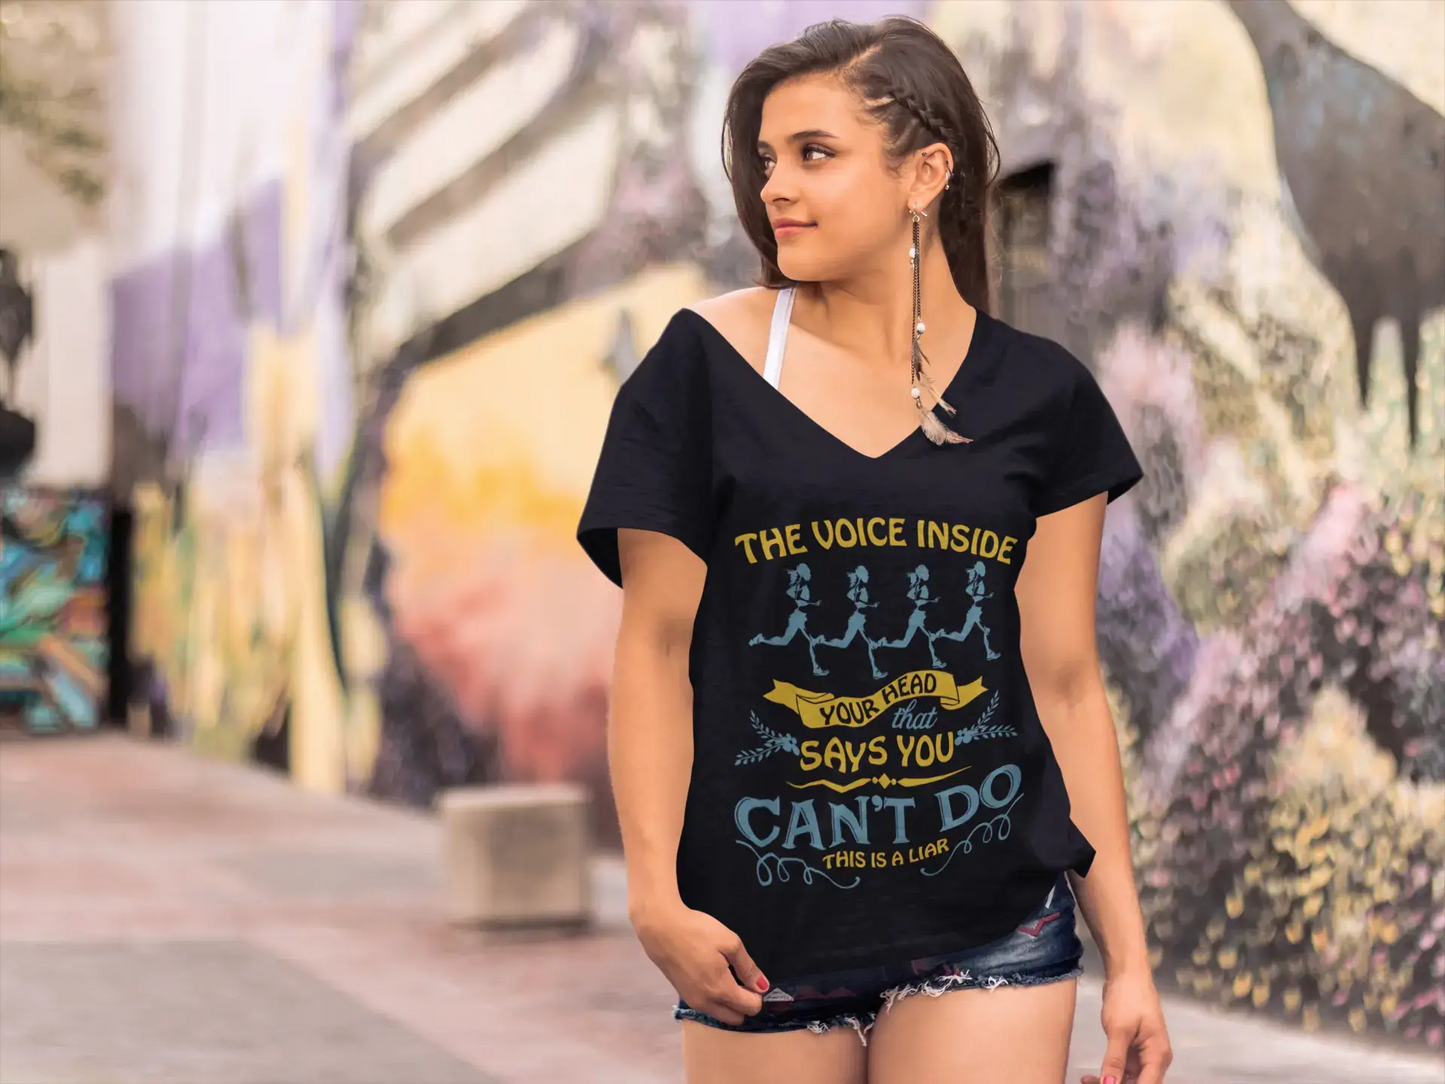 ULTRABASIC Women's T-Shirt The Voice Inside Your Head Says You Can't Do This Is a Liar - Motivational Gift